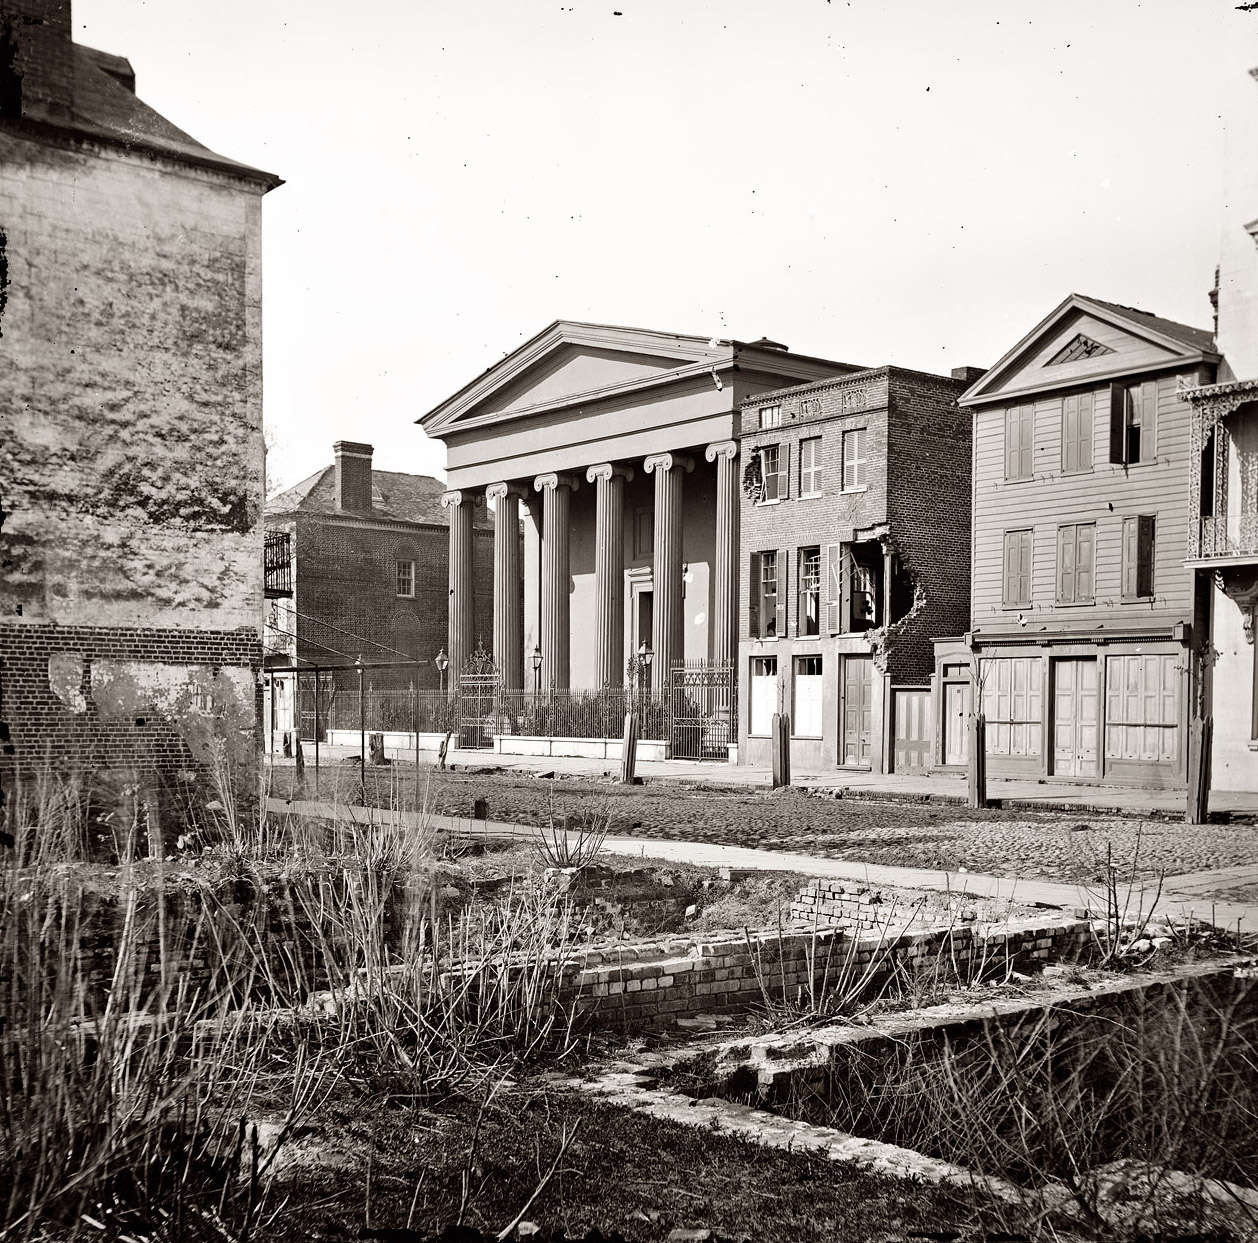 1865. "Charleston, South Carolina. Hibernian Hall (with columns; 105 Meeting Street), place of meeting after the burning of Secession Hall. Photograph of the Federal Navy, and seaborne expeditions against the Atlantic Coast of the Confederacy." View full size. Left half of wet-collodion glass-plate stereograph.